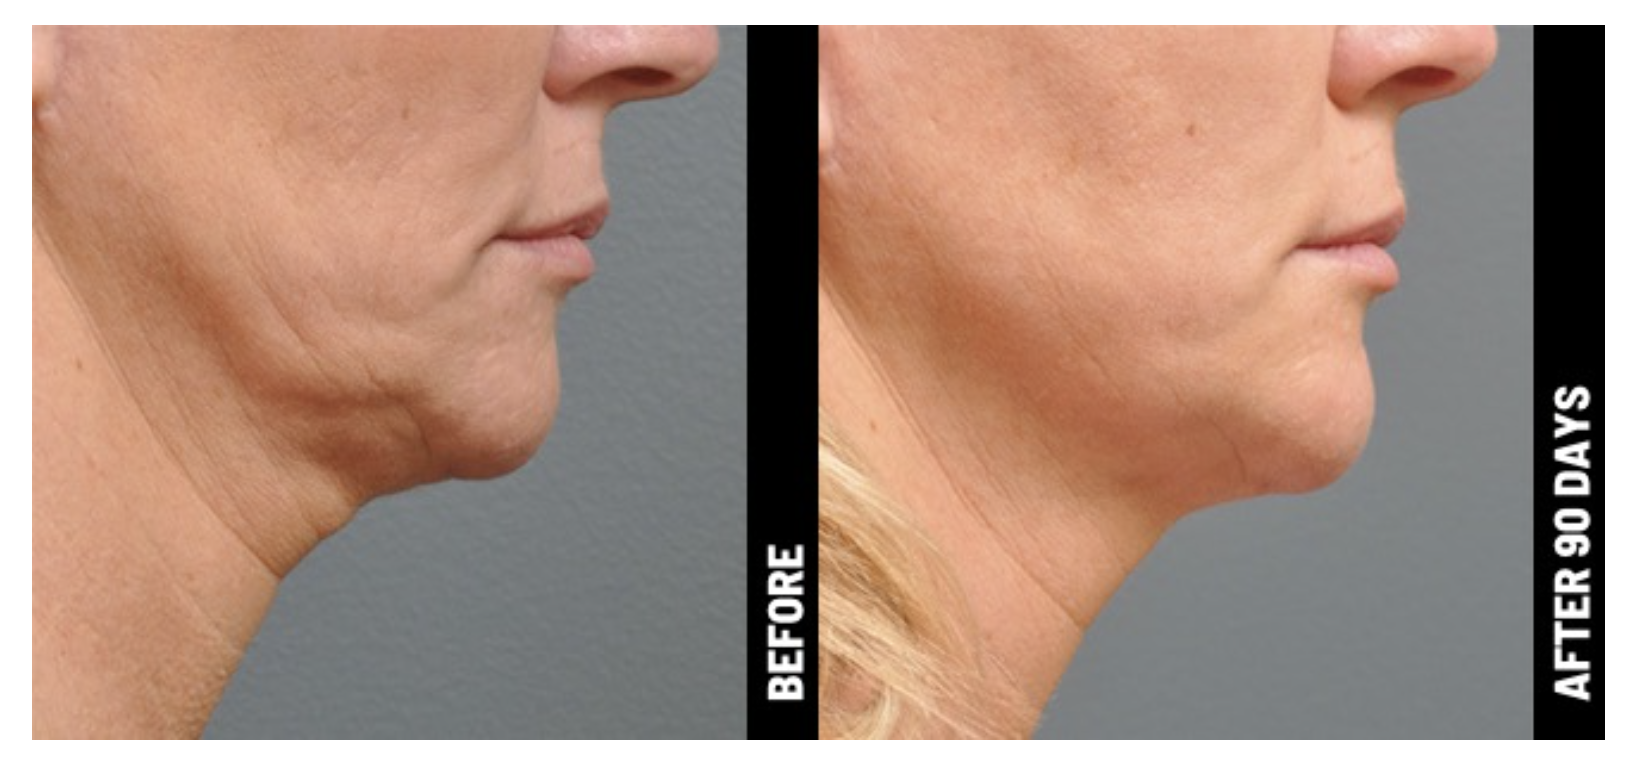 women-before-and-after-image-ultherapy-face-and-neck.png